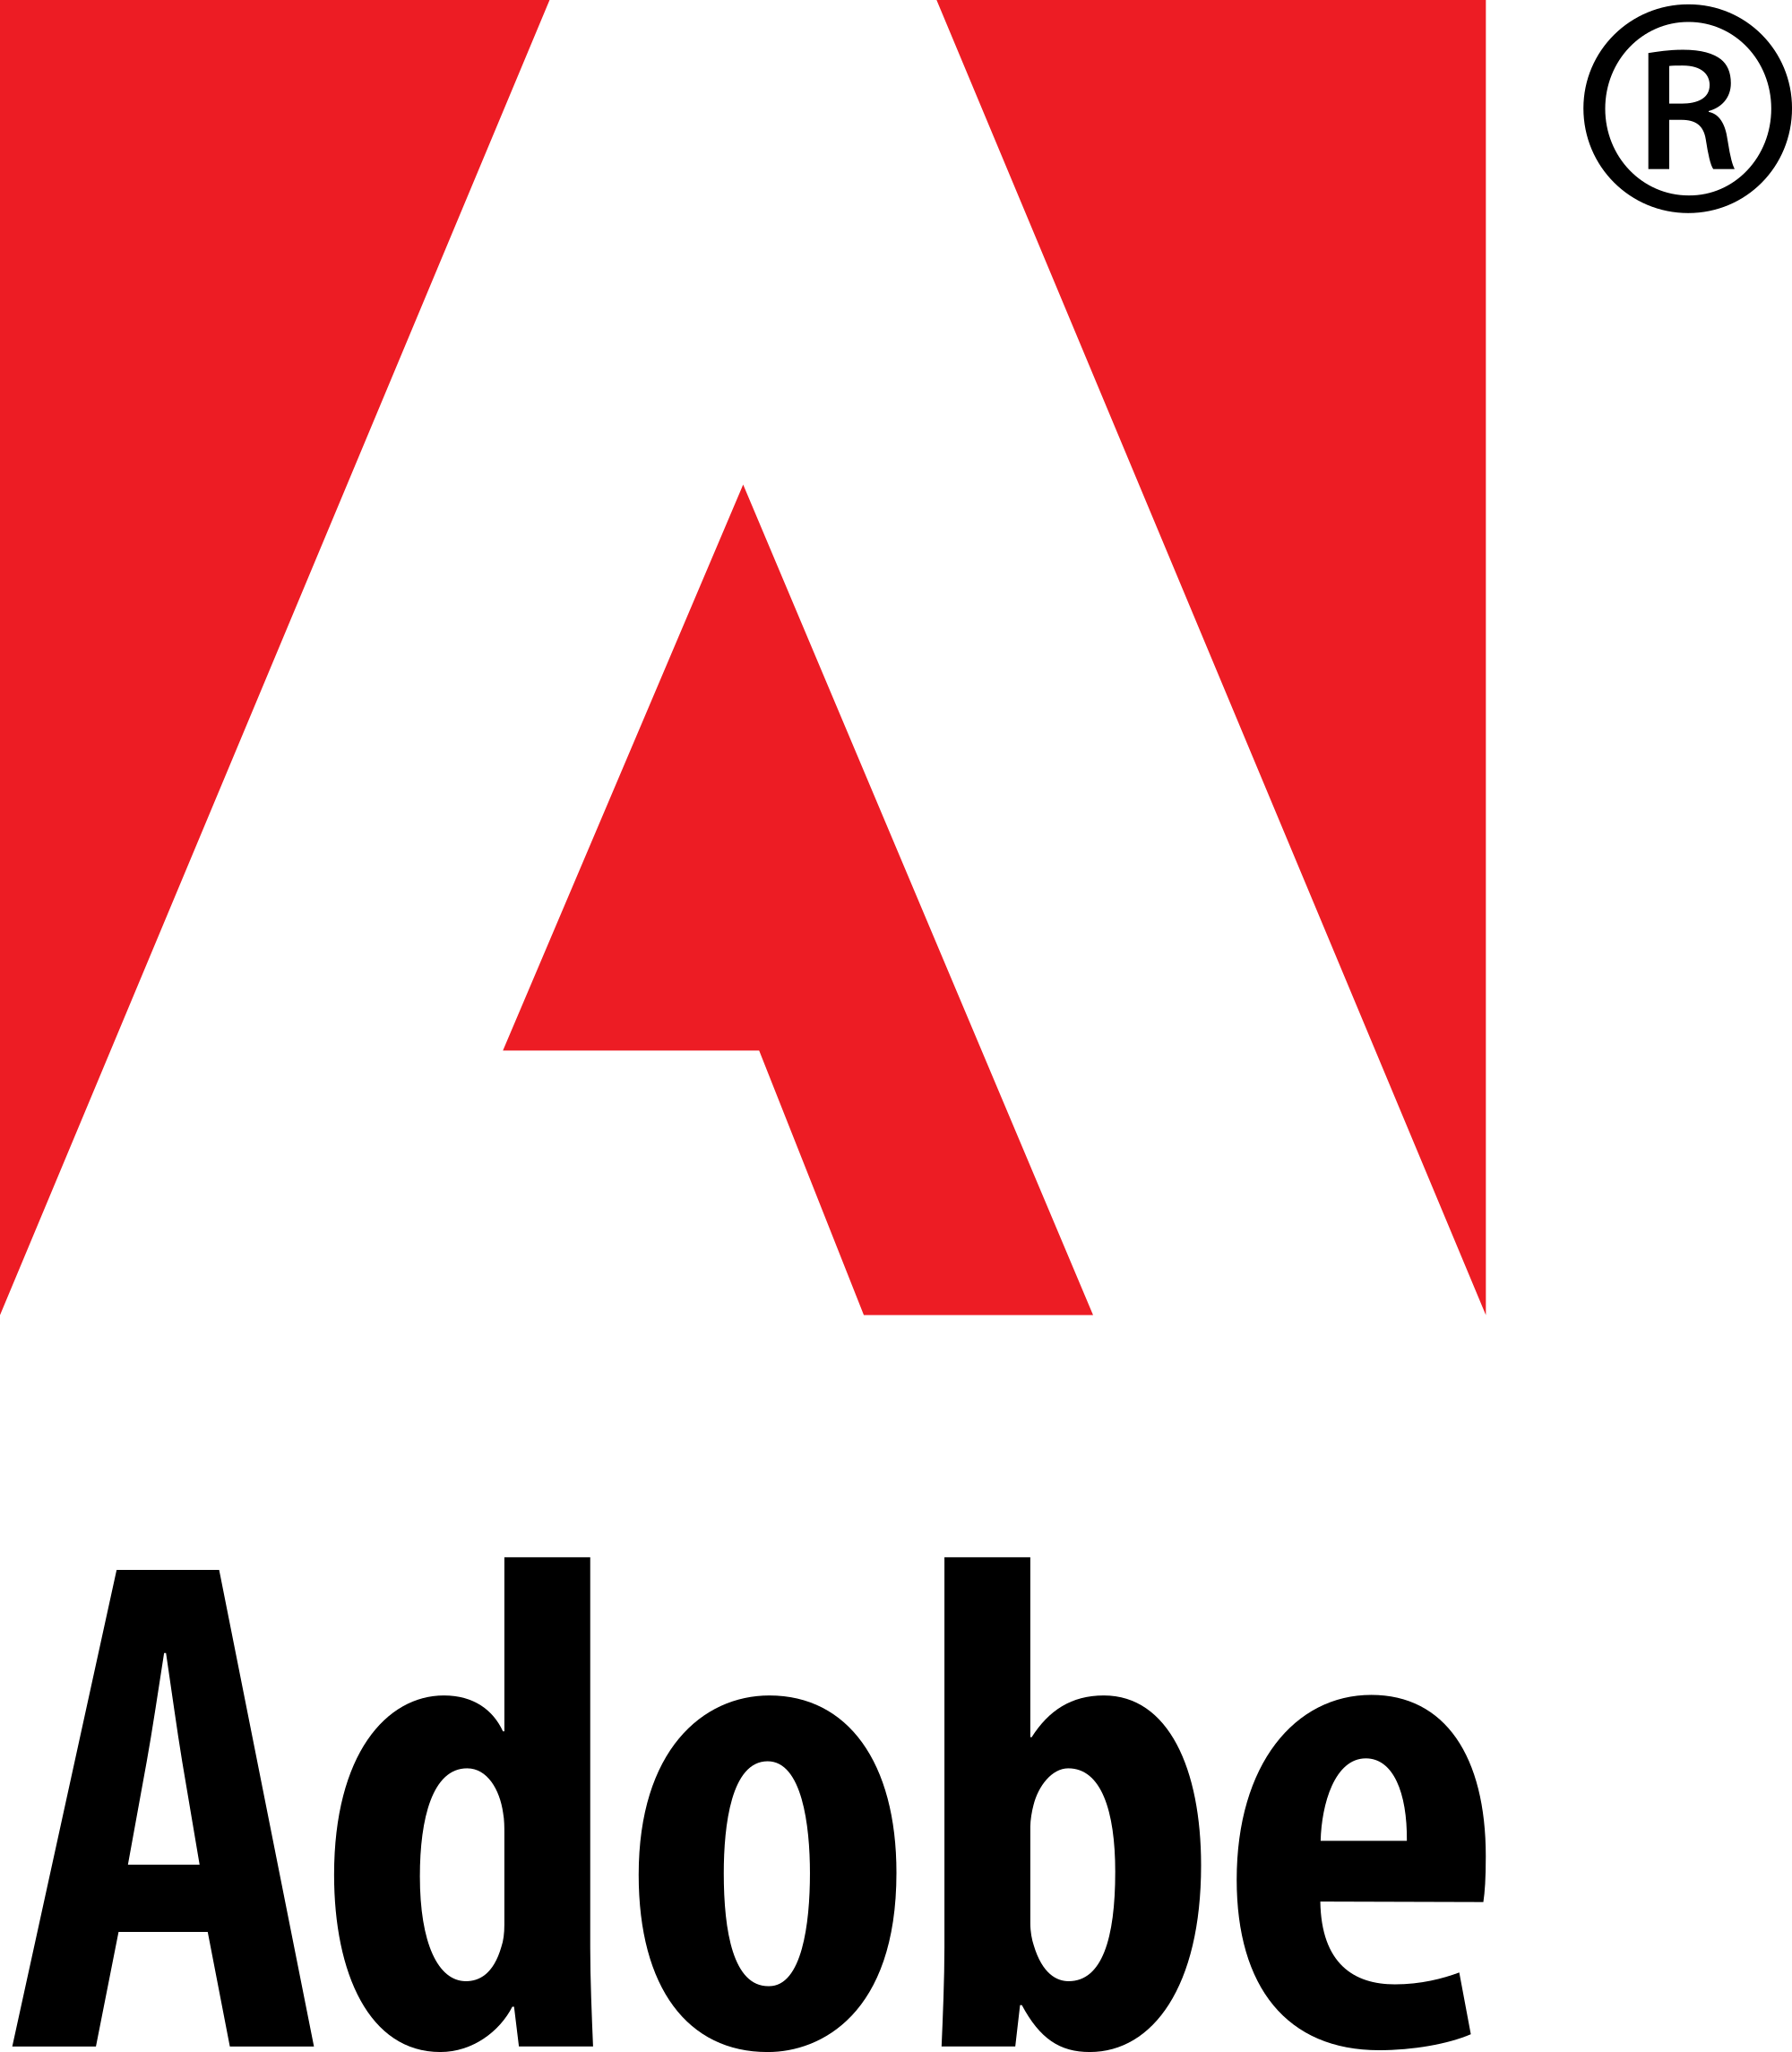 File:Adobe Systems logo and wordmark.svg - Wikimedia Commons